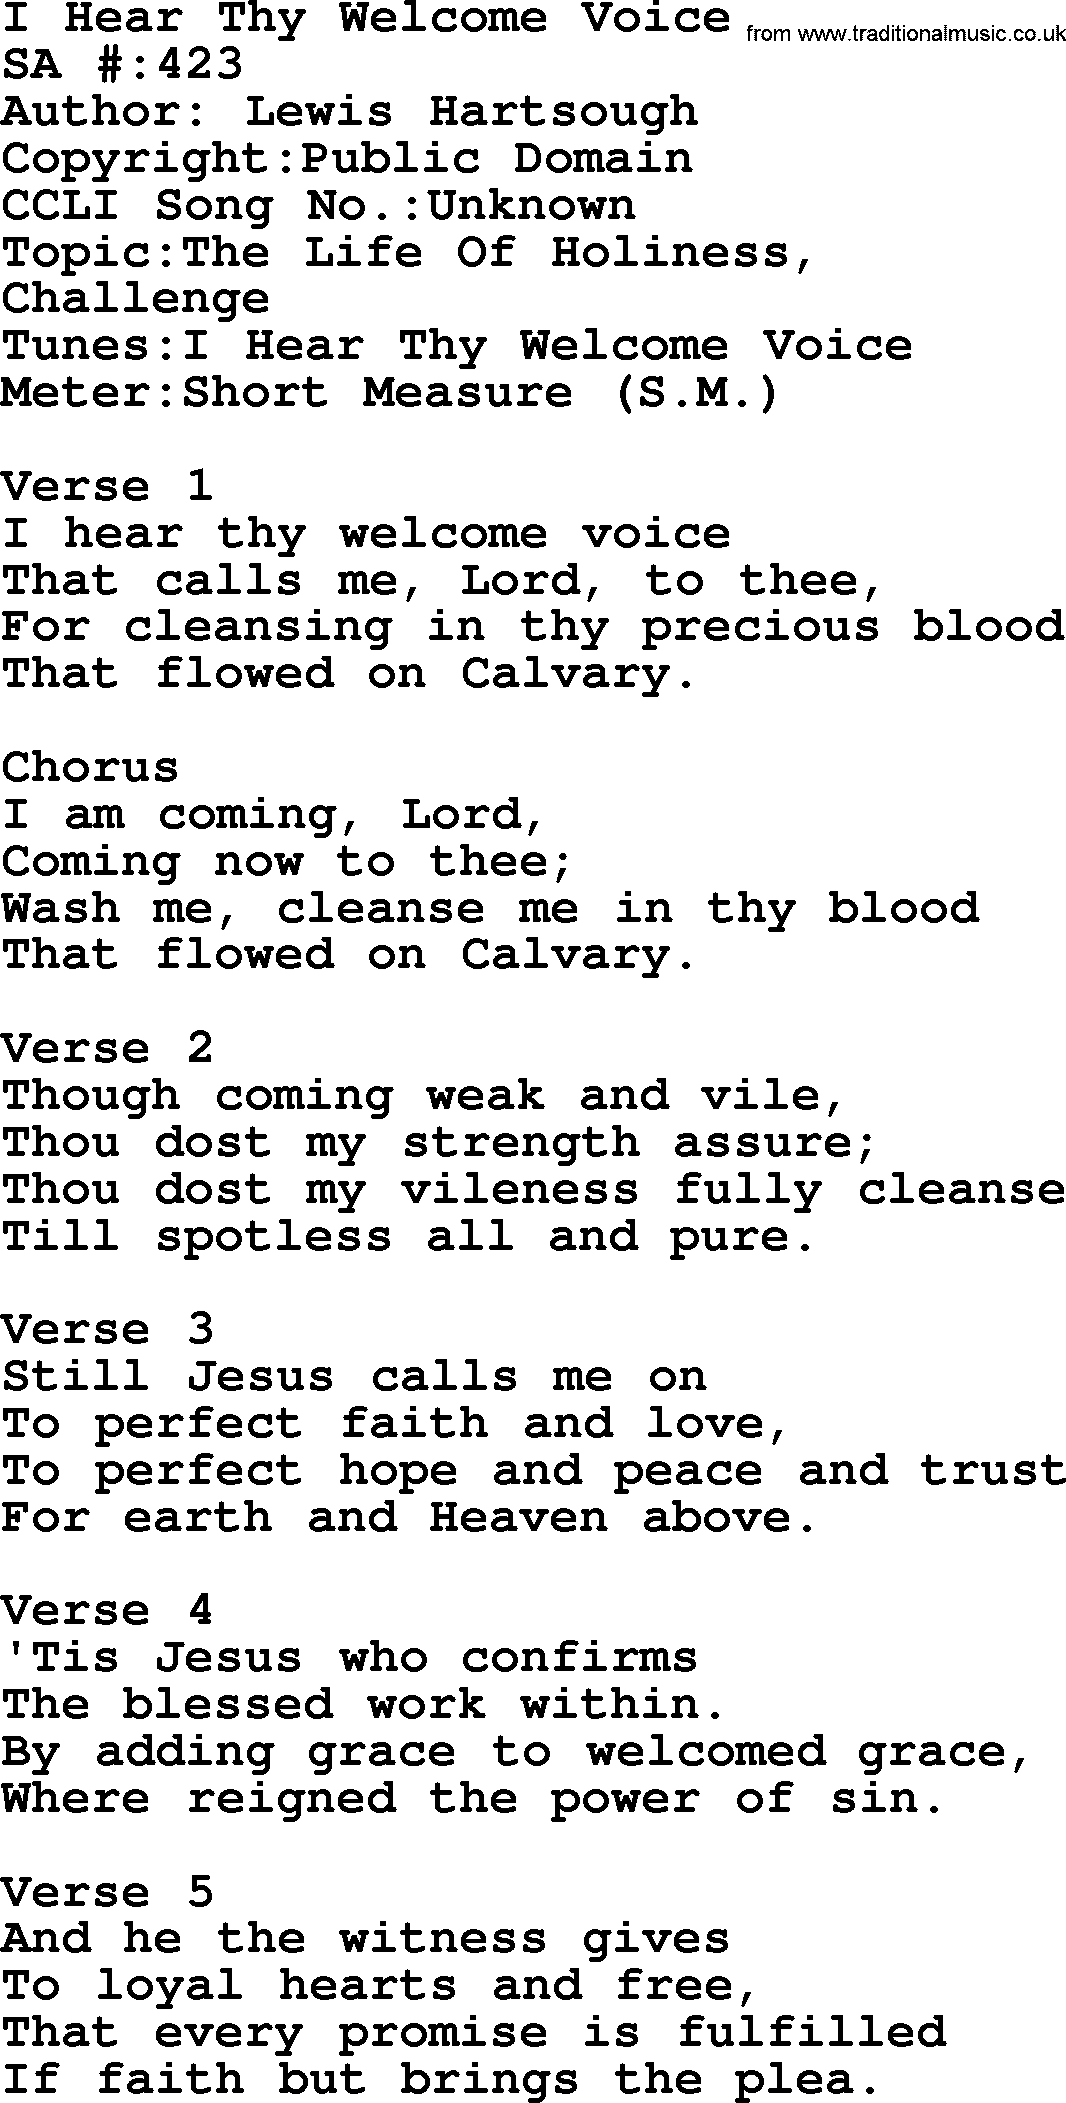 Salvation Army Hymnal, title: I Hear Thy Welcome Voice, with lyrics and PDF,